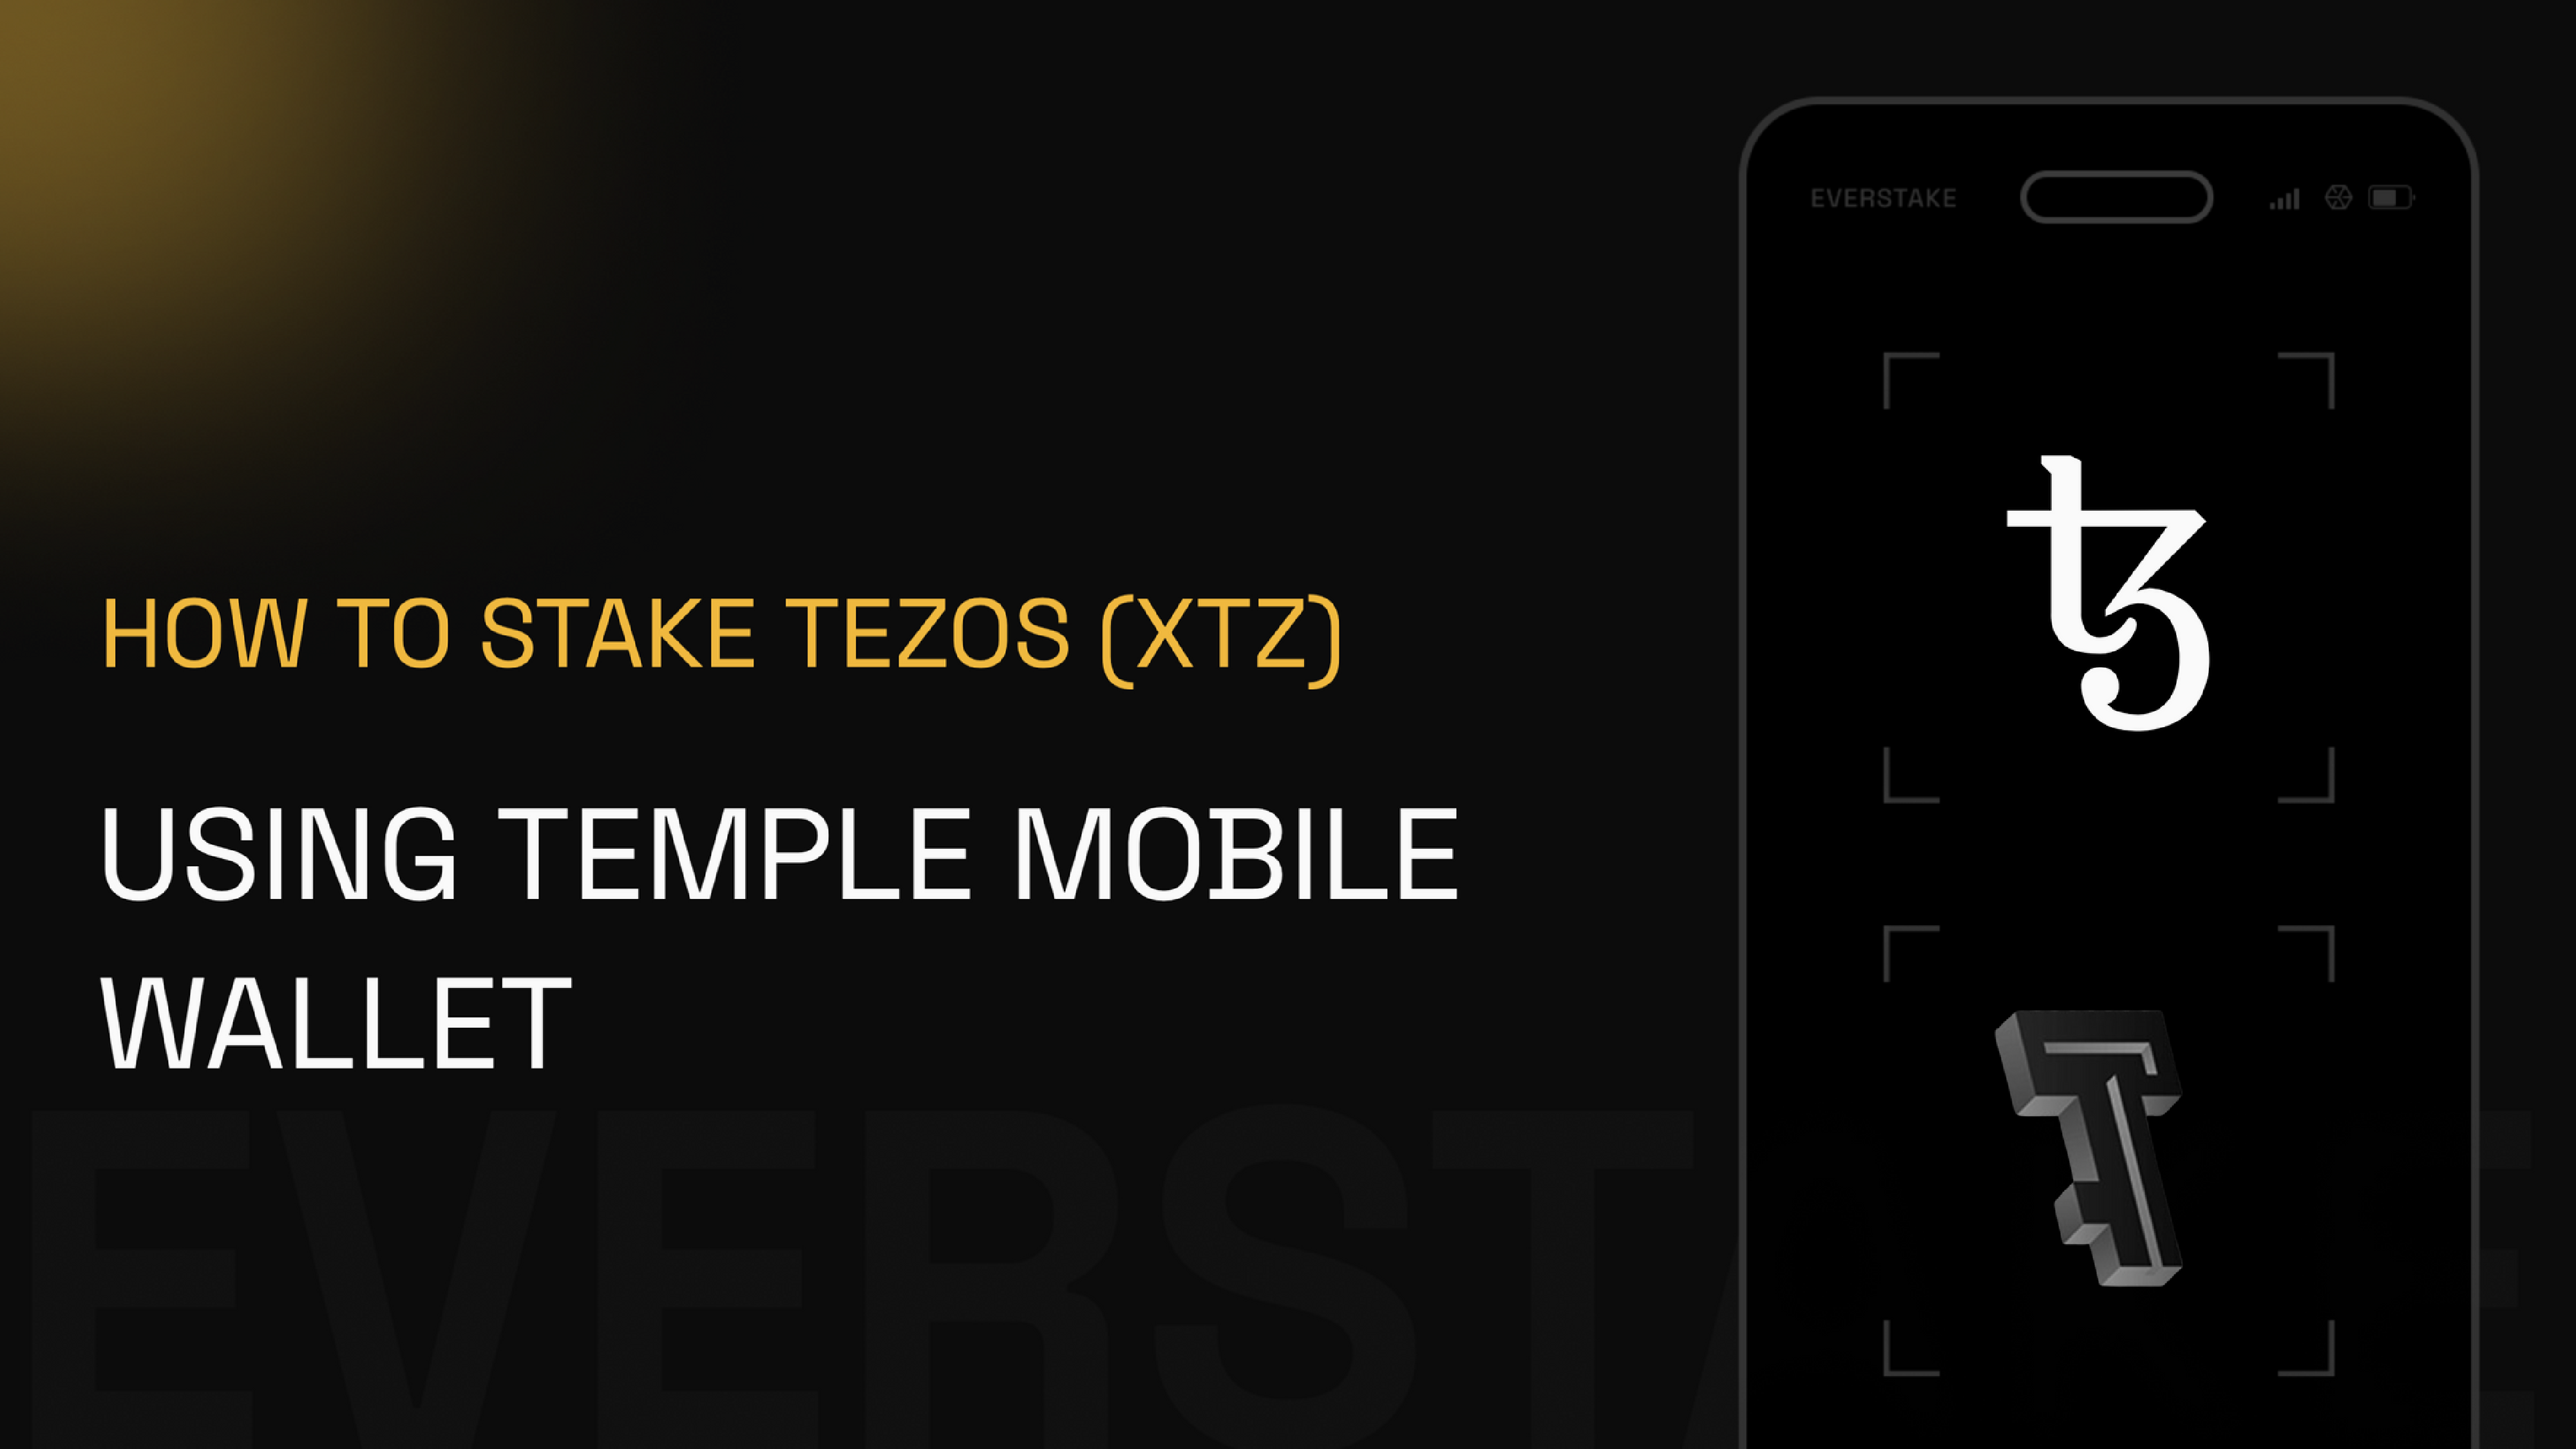 How to stake Tezos (XTZ) using Temple Mobile Wallet